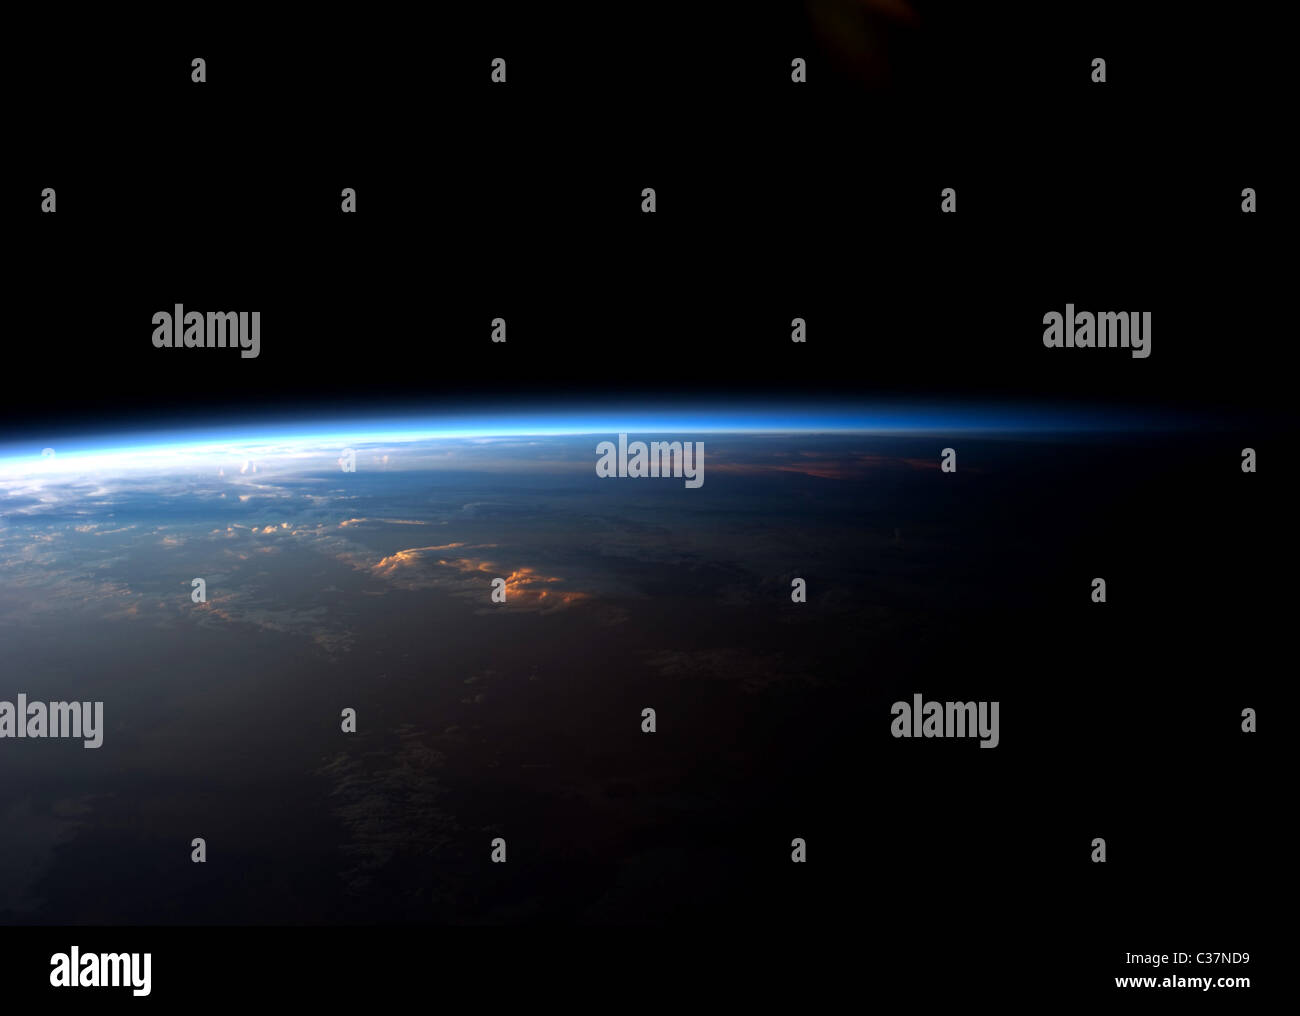 Sunrise or sunset over planet Earth viewed from the International Space Station. Stock Photo